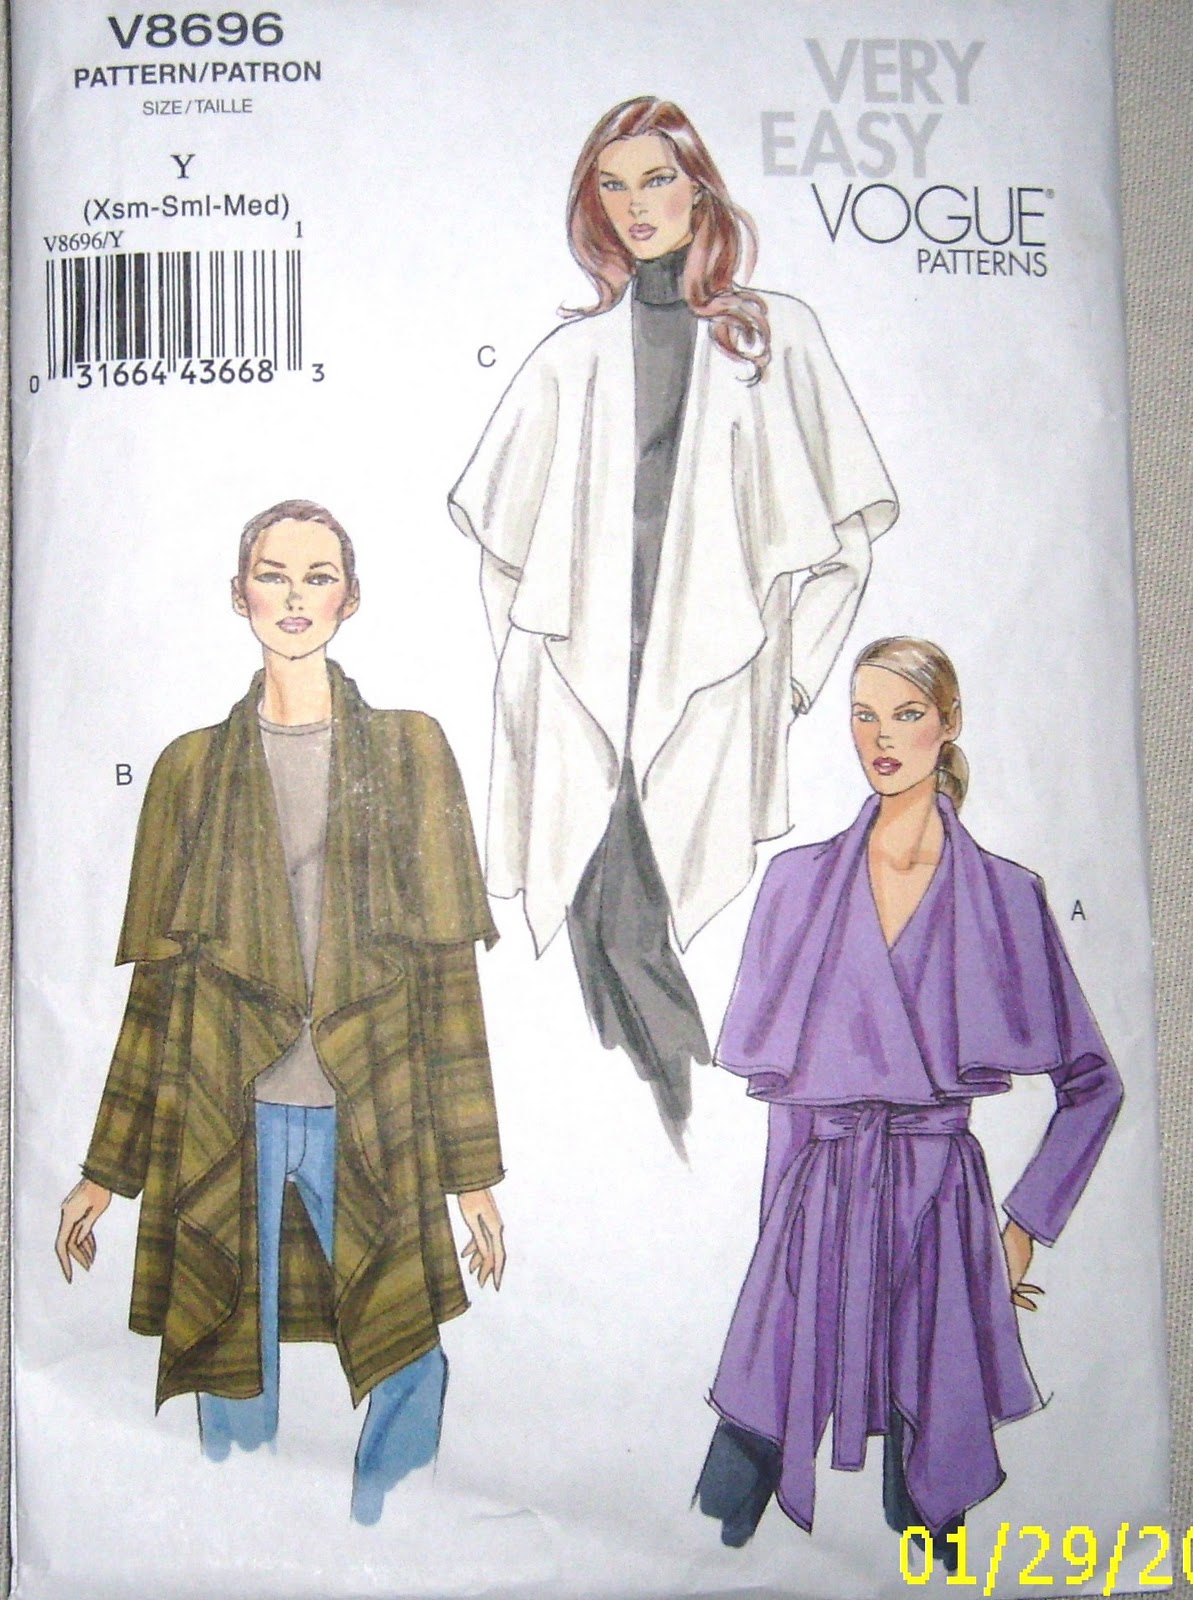 Sewcraftee-makeitwearitloveit: I made Vogue 8696 - A sewing tale of woe